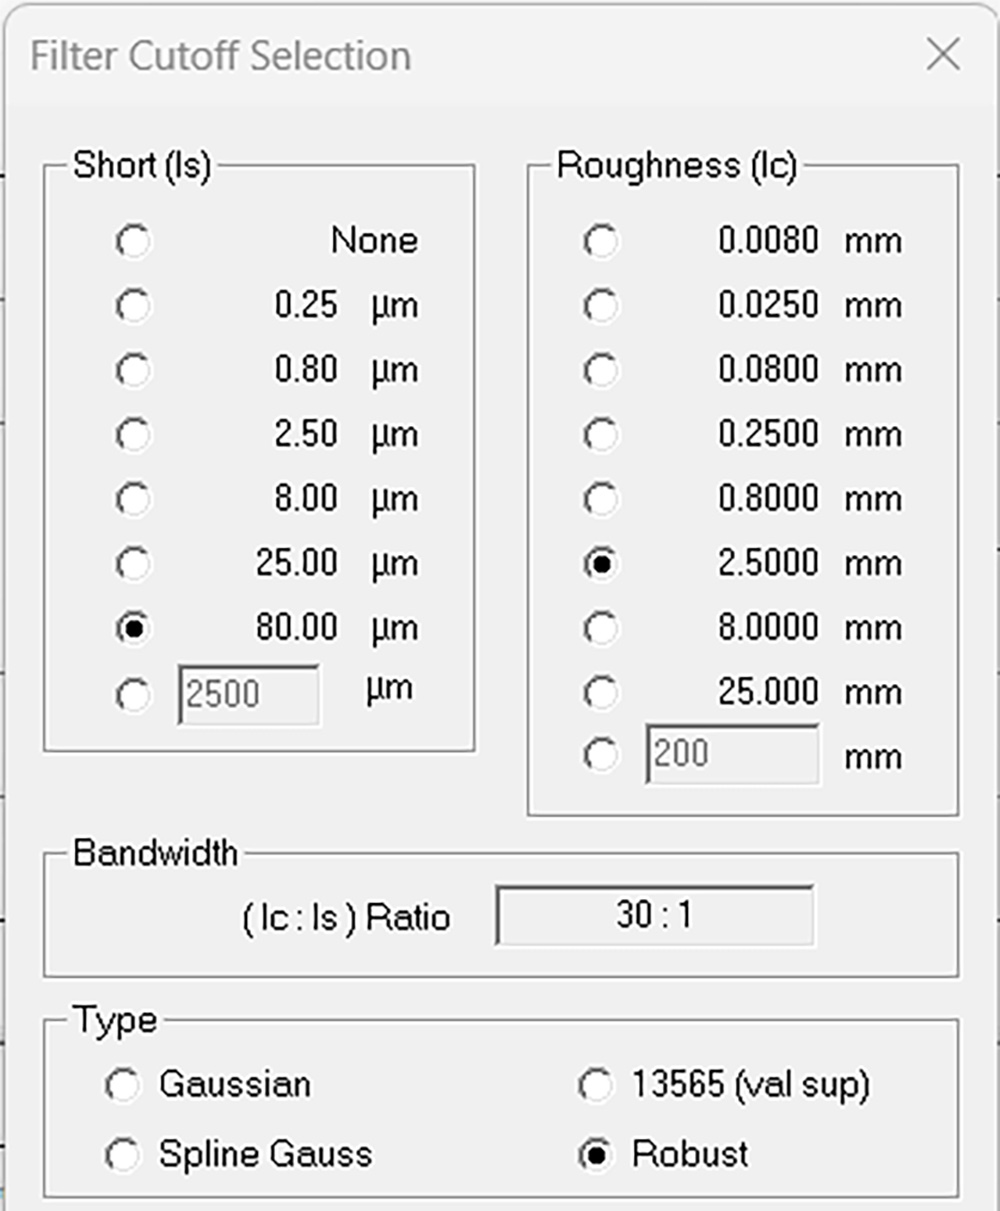 surface roughness software, omnisurf, filter cutoff selection